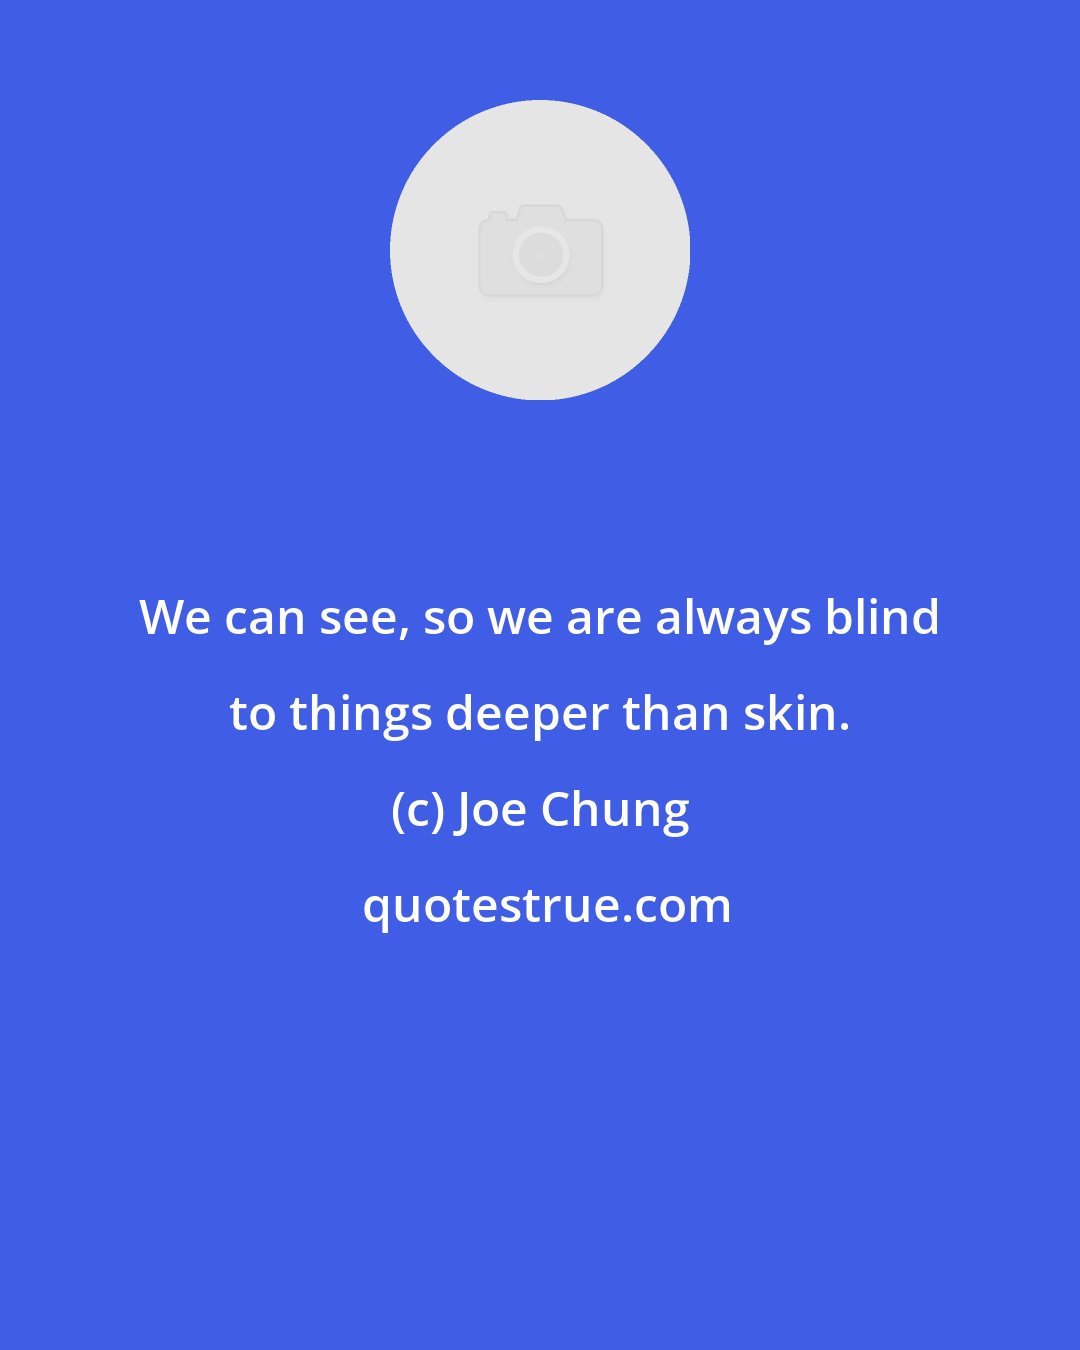 Joe Chung: We can see, so we are always blind to things deeper than skin.